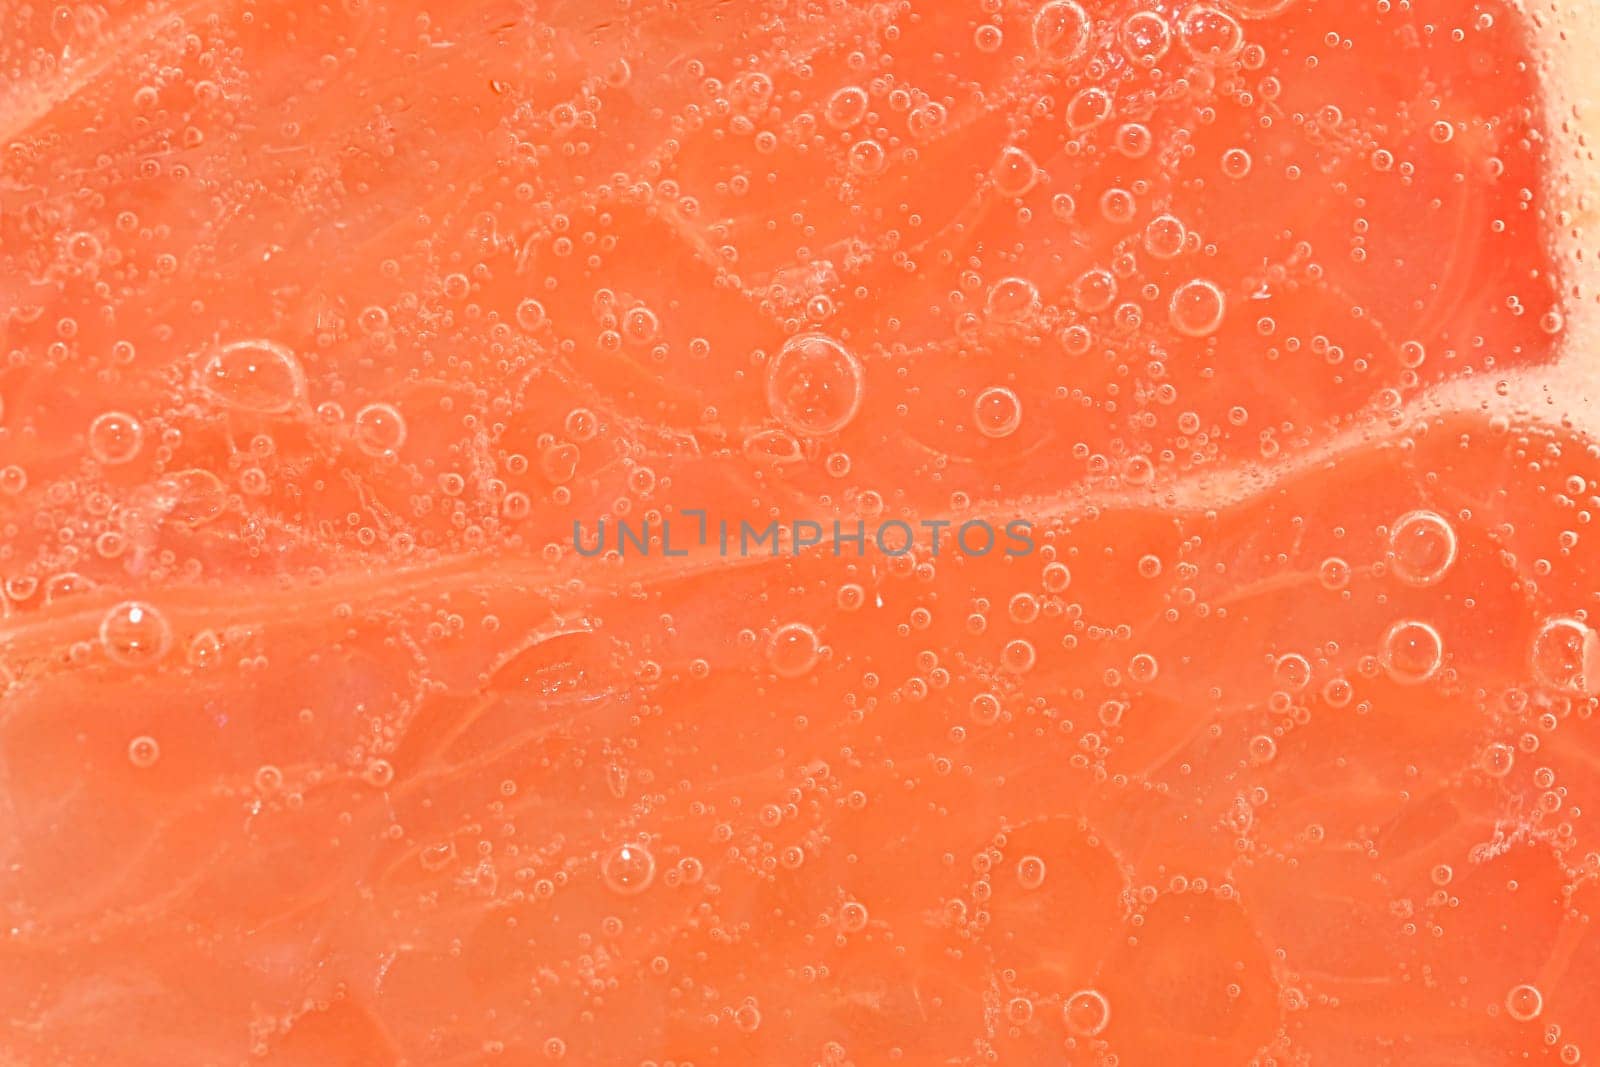 Slice of ripe grapefruit in water. Close-up of grapefruit in liquid with bubbles. Slice of ripe grapefruit in sparkling water. Macro horizontal image of fruit in carbonated water